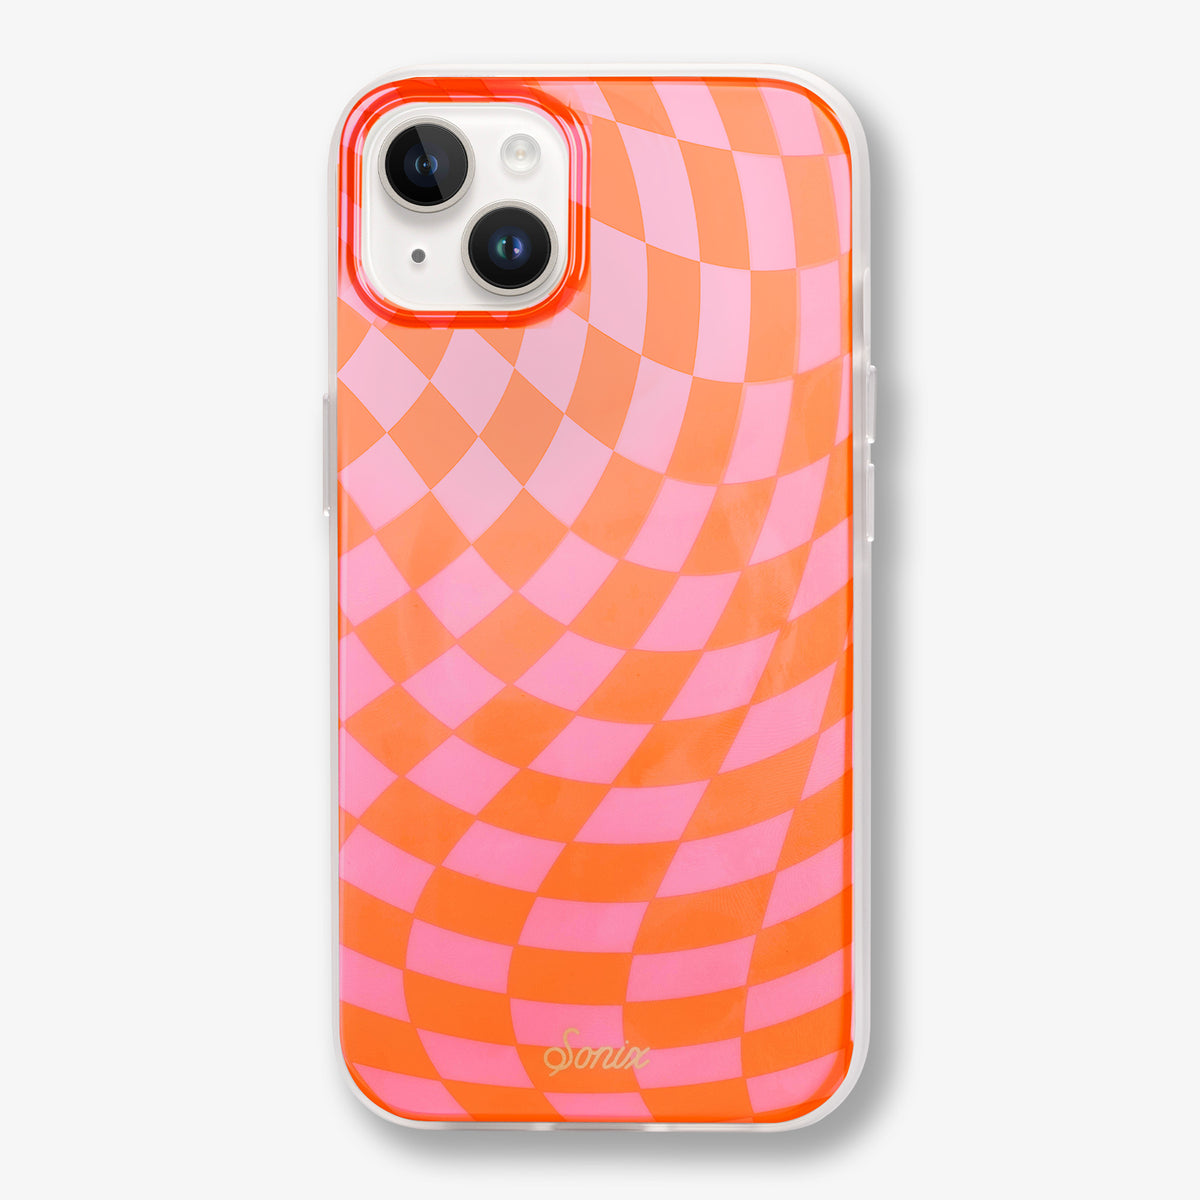 Cute Checkered Flowers Phone Case for iPhone 11, 12, 13, 14, Pro